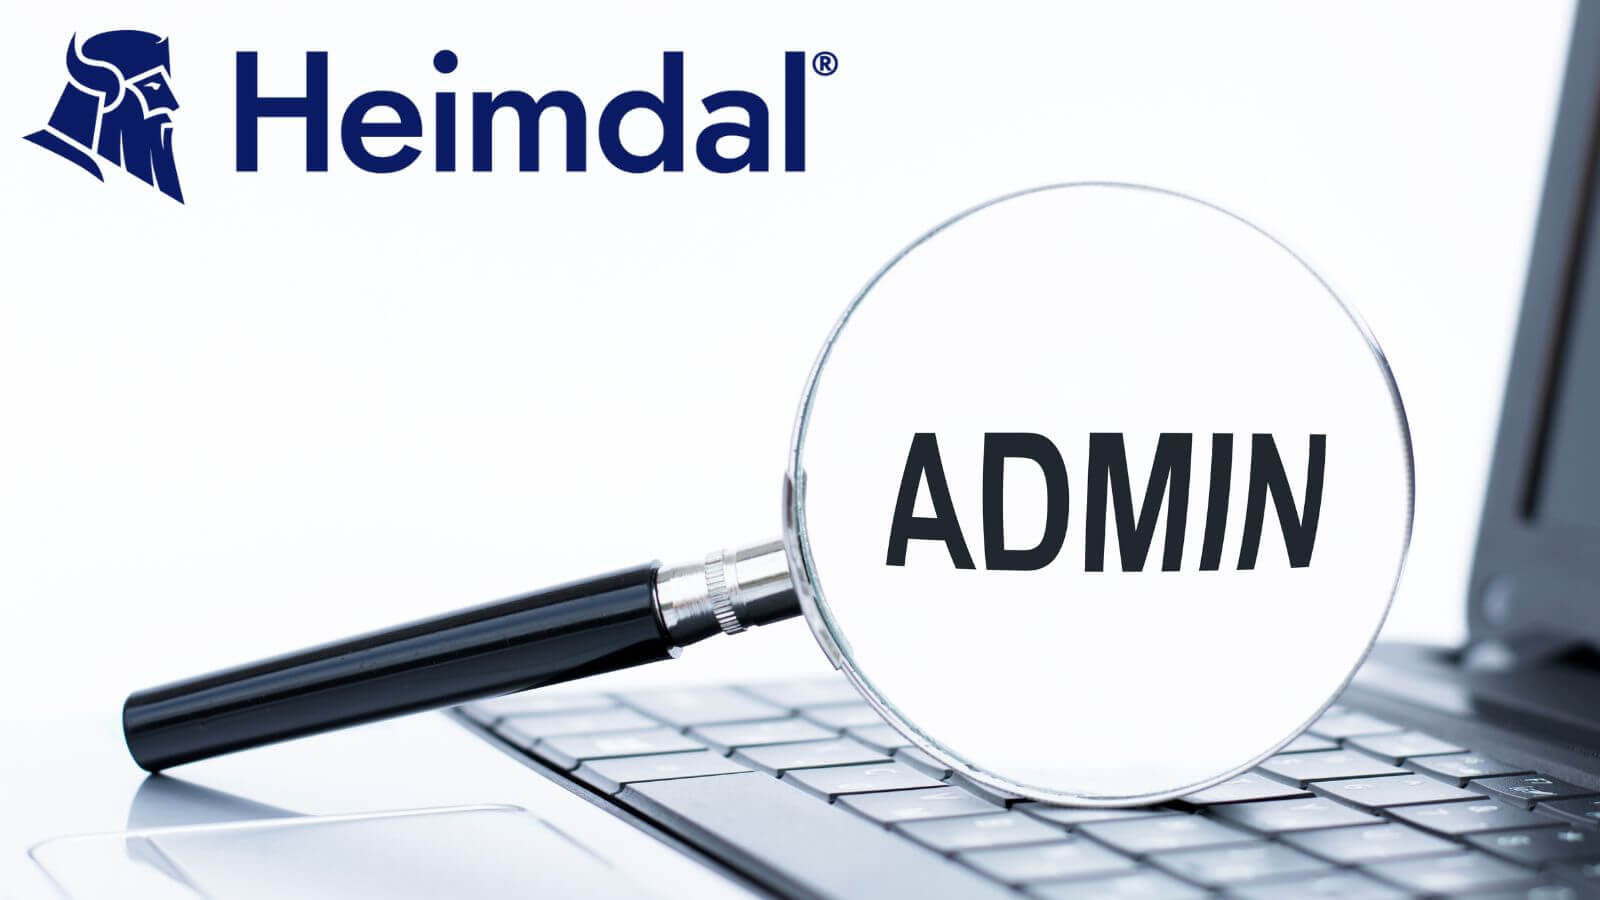 Why Removing Admin Rights Closes Critical Vulnerabilities in Your Organization – Source: heimdalsecurity.com